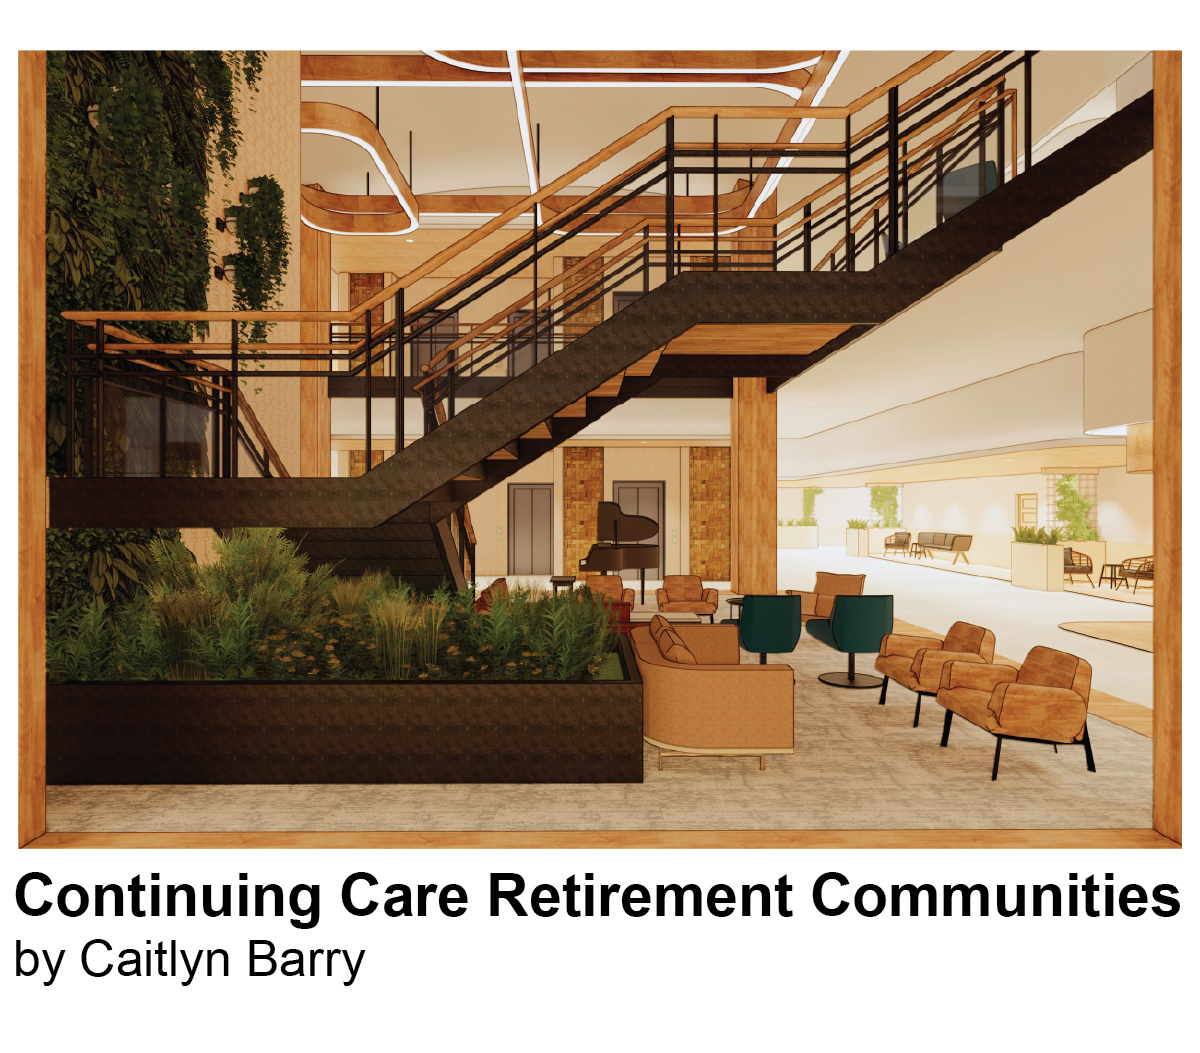 Continuing Care Retirement Communities by Caitlyn Barry